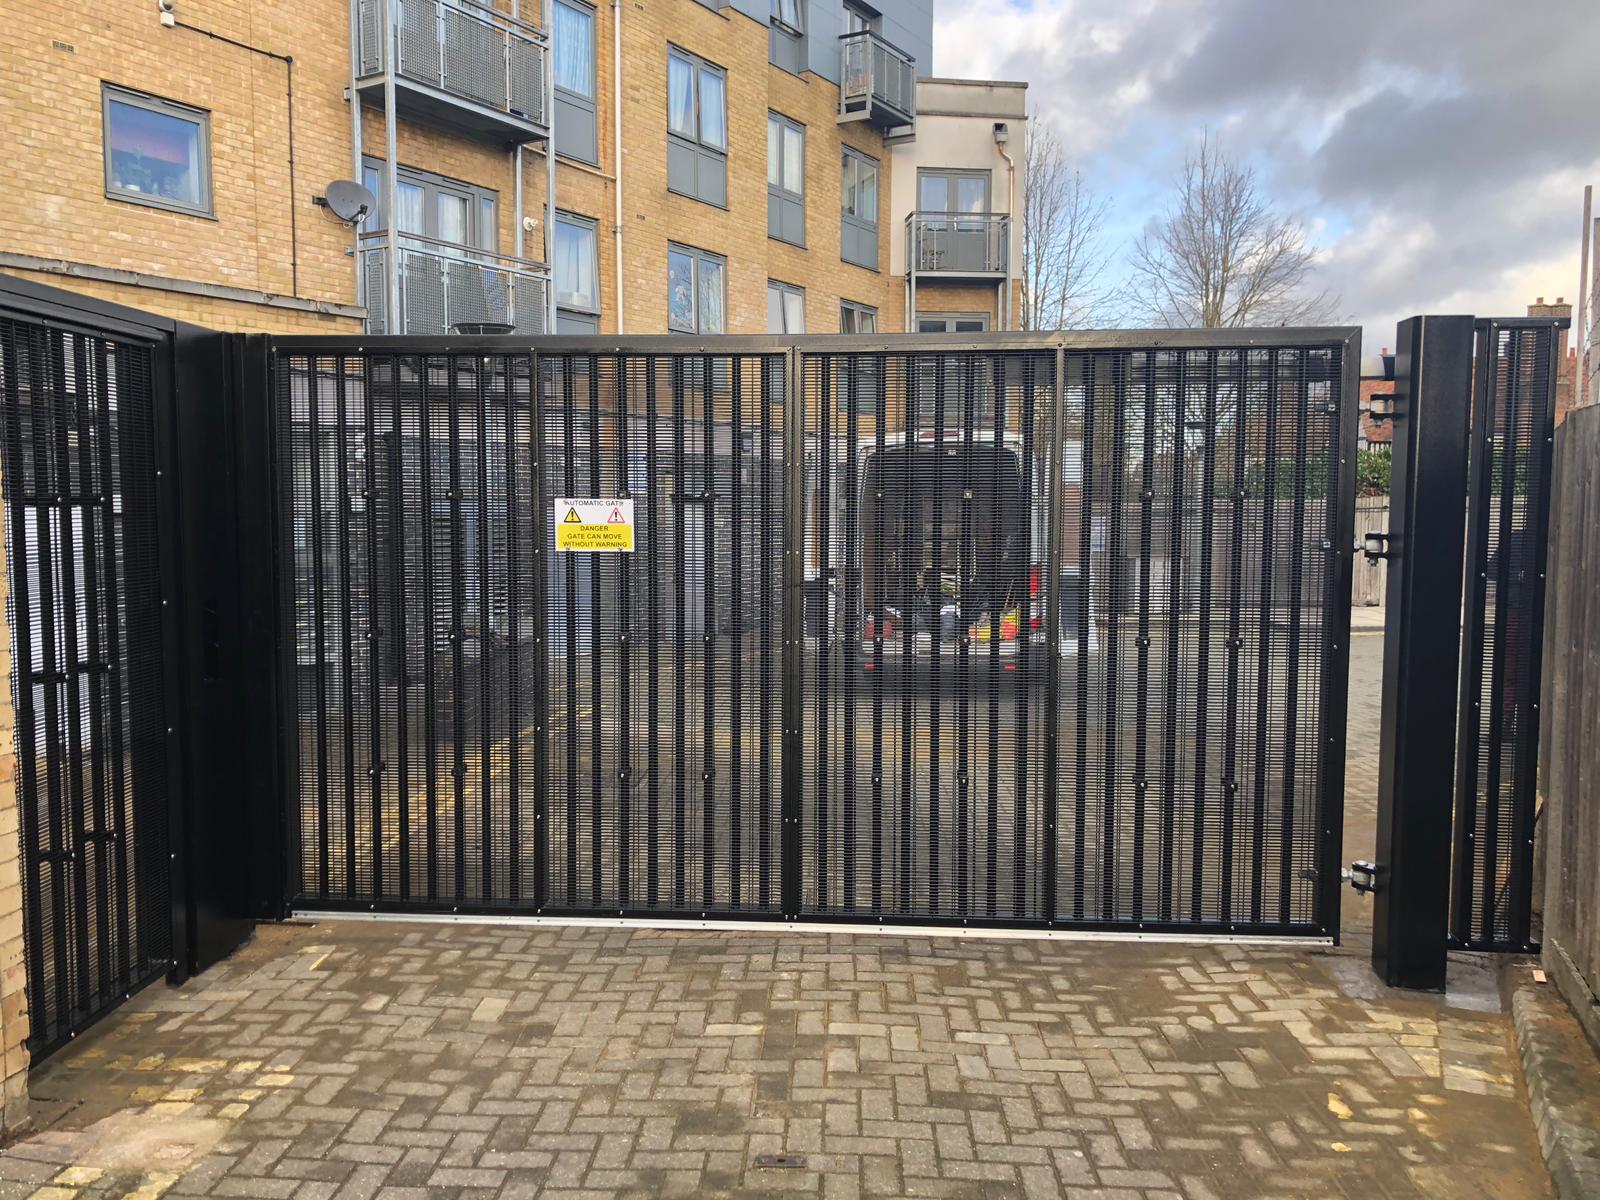 PEDESTRIAN AND VEHICLE STEEL LPS1175 SR2 GATES NOW TESTED TO SR3 STANDARD